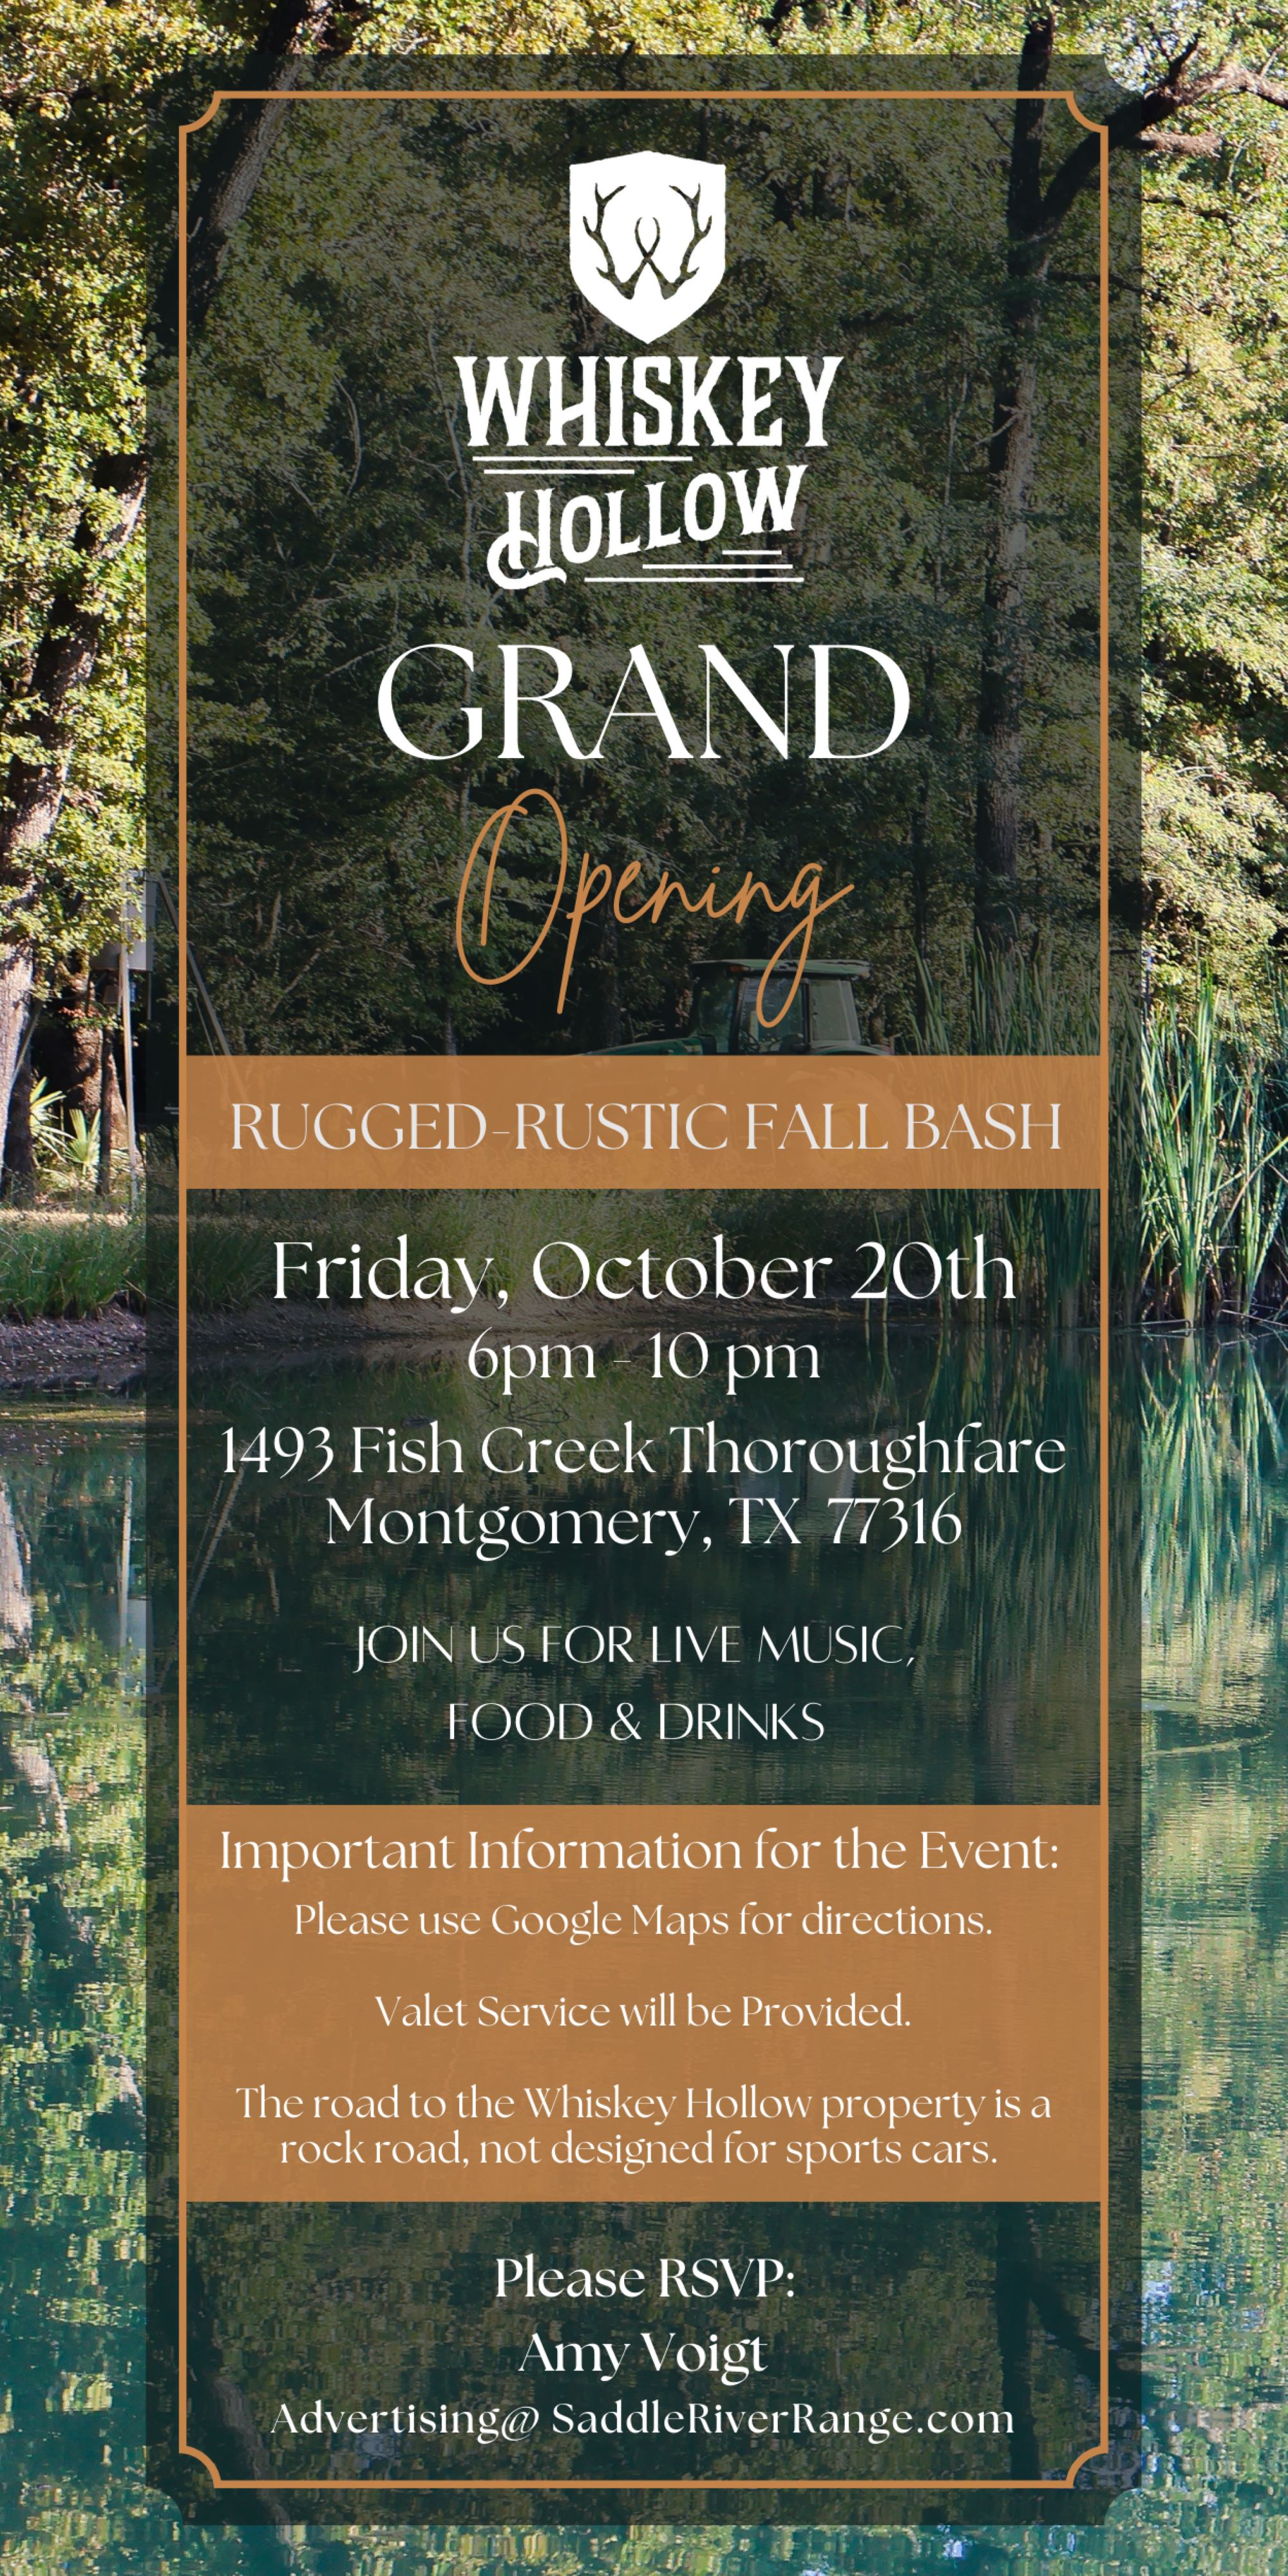 
Whiskey Hollow Grand Opening - Rugged Rustic Fall Bash